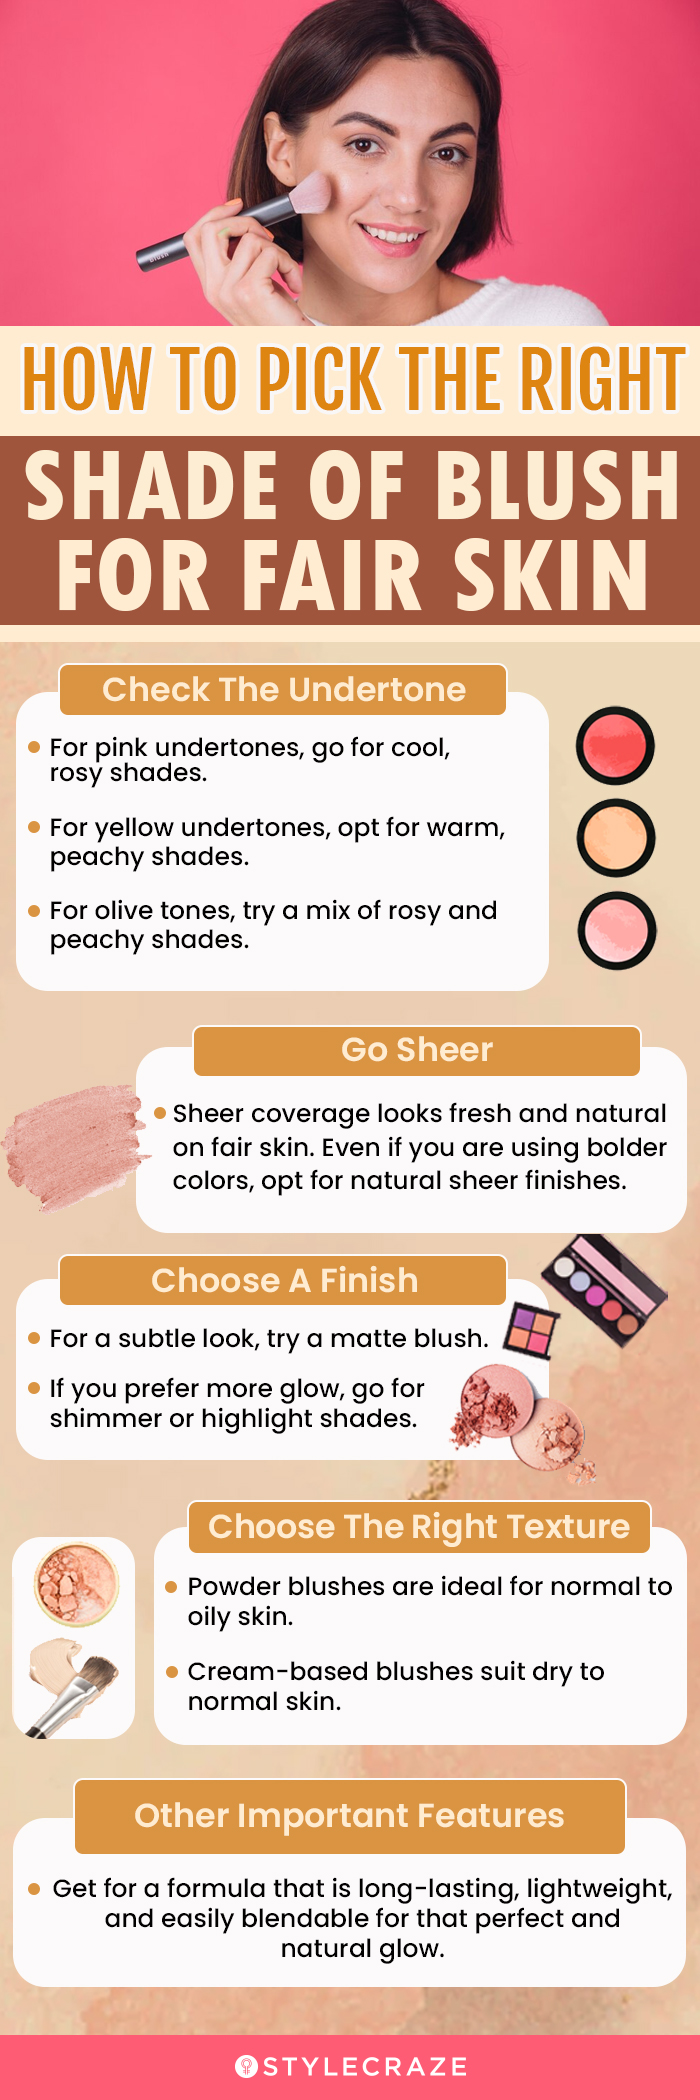 How To Pick The Right Shade Of Blush For Fair Skin (infographic)